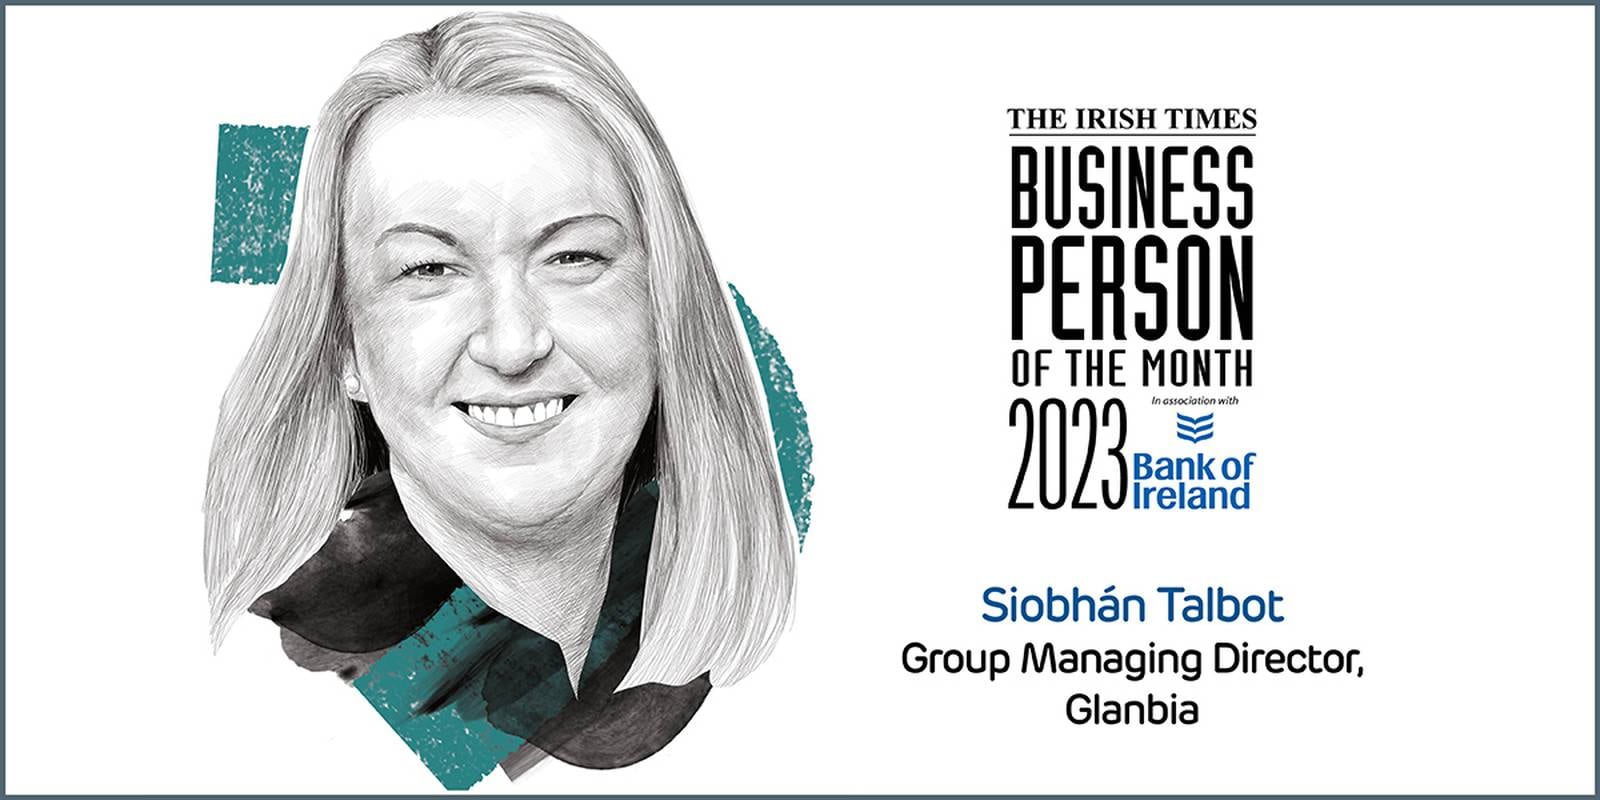 Siobhan Talbot, group managing director of Glanbia, BPOM for May 2023